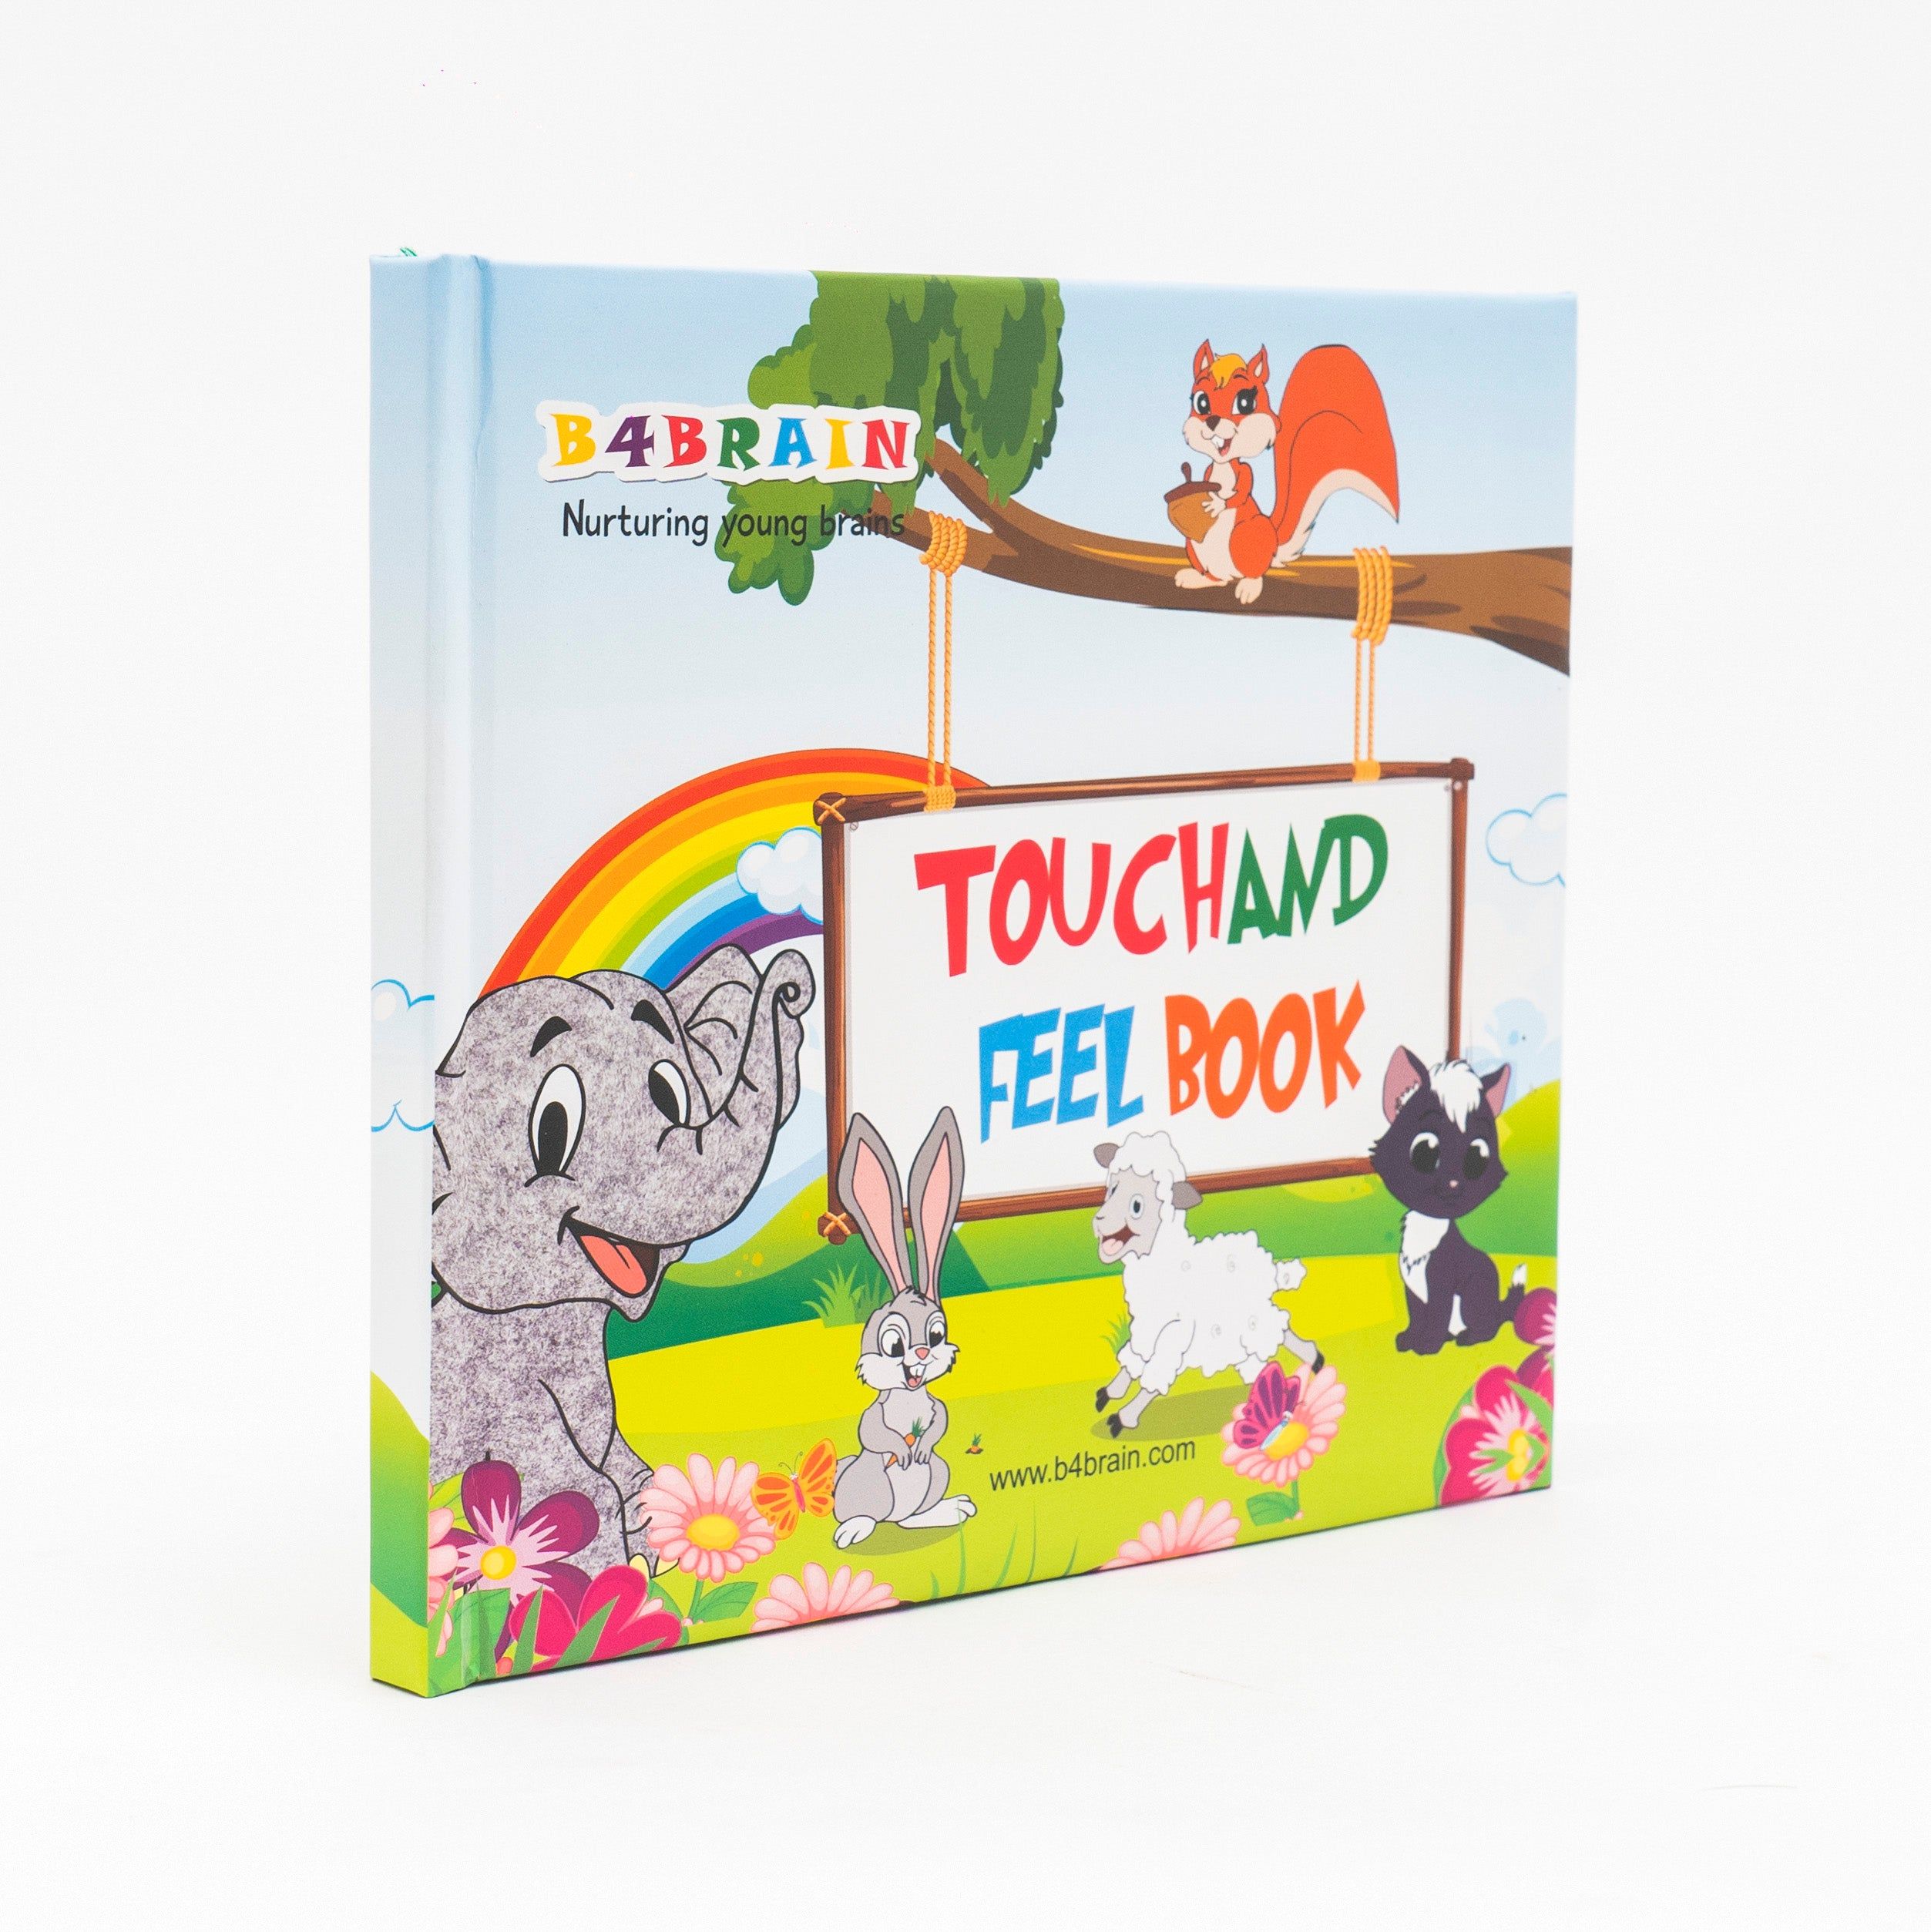 Touch and feel book For babies